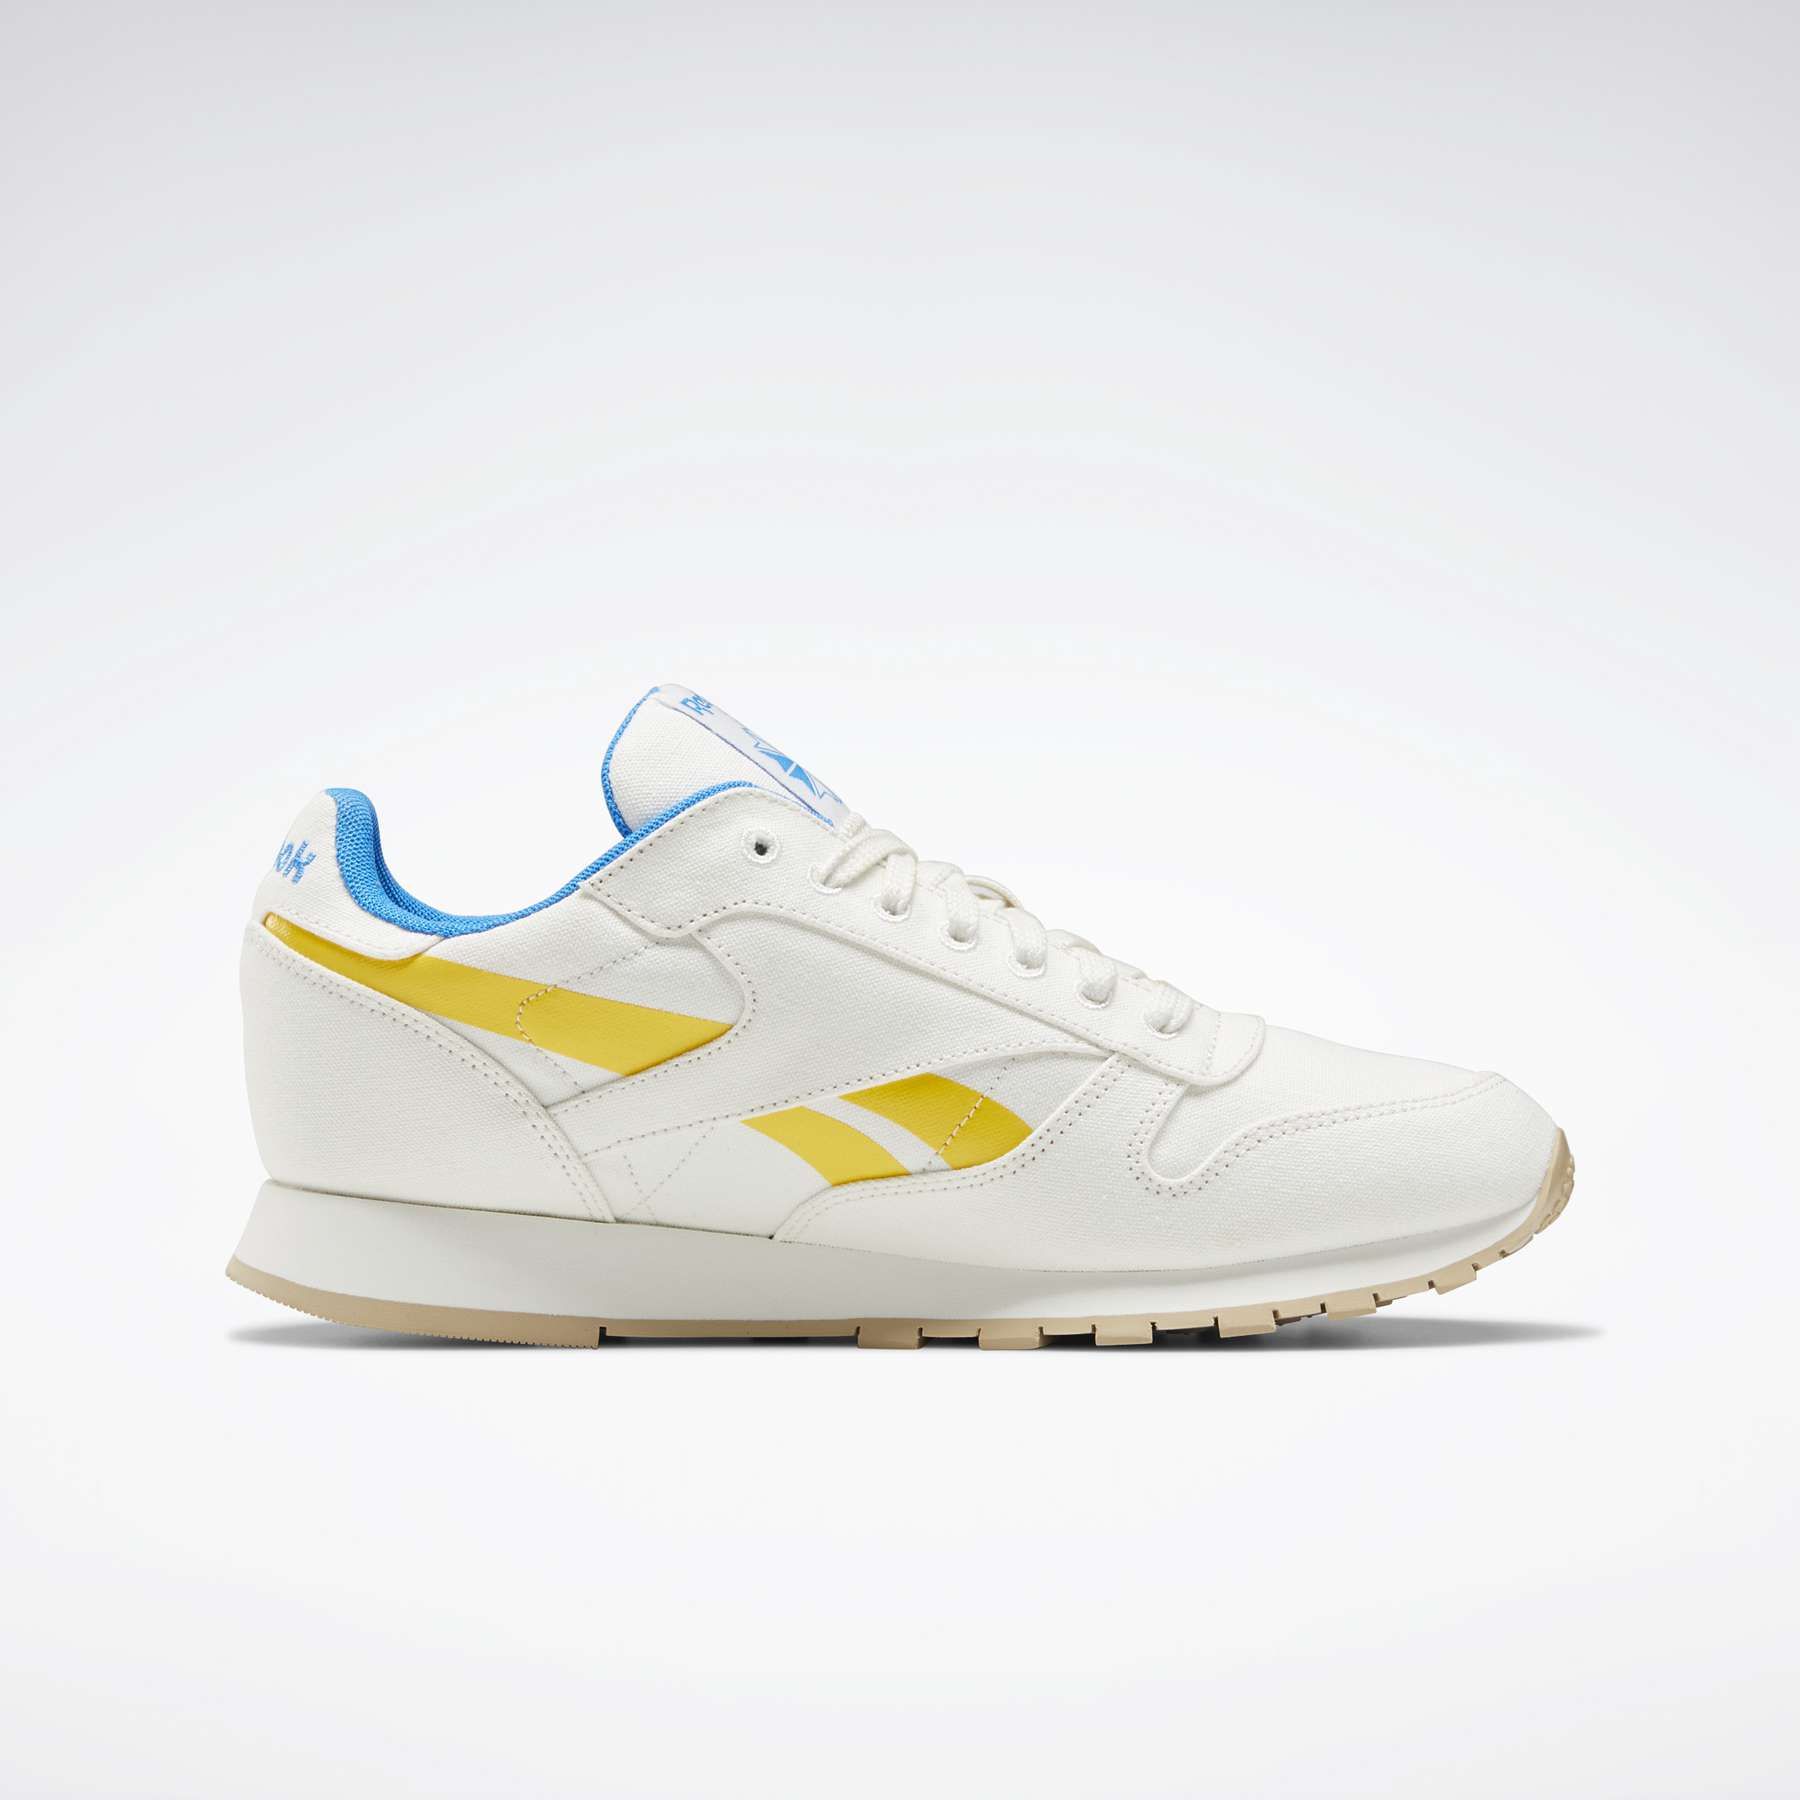 Reebok Classic Leather Grow Men's Shoes